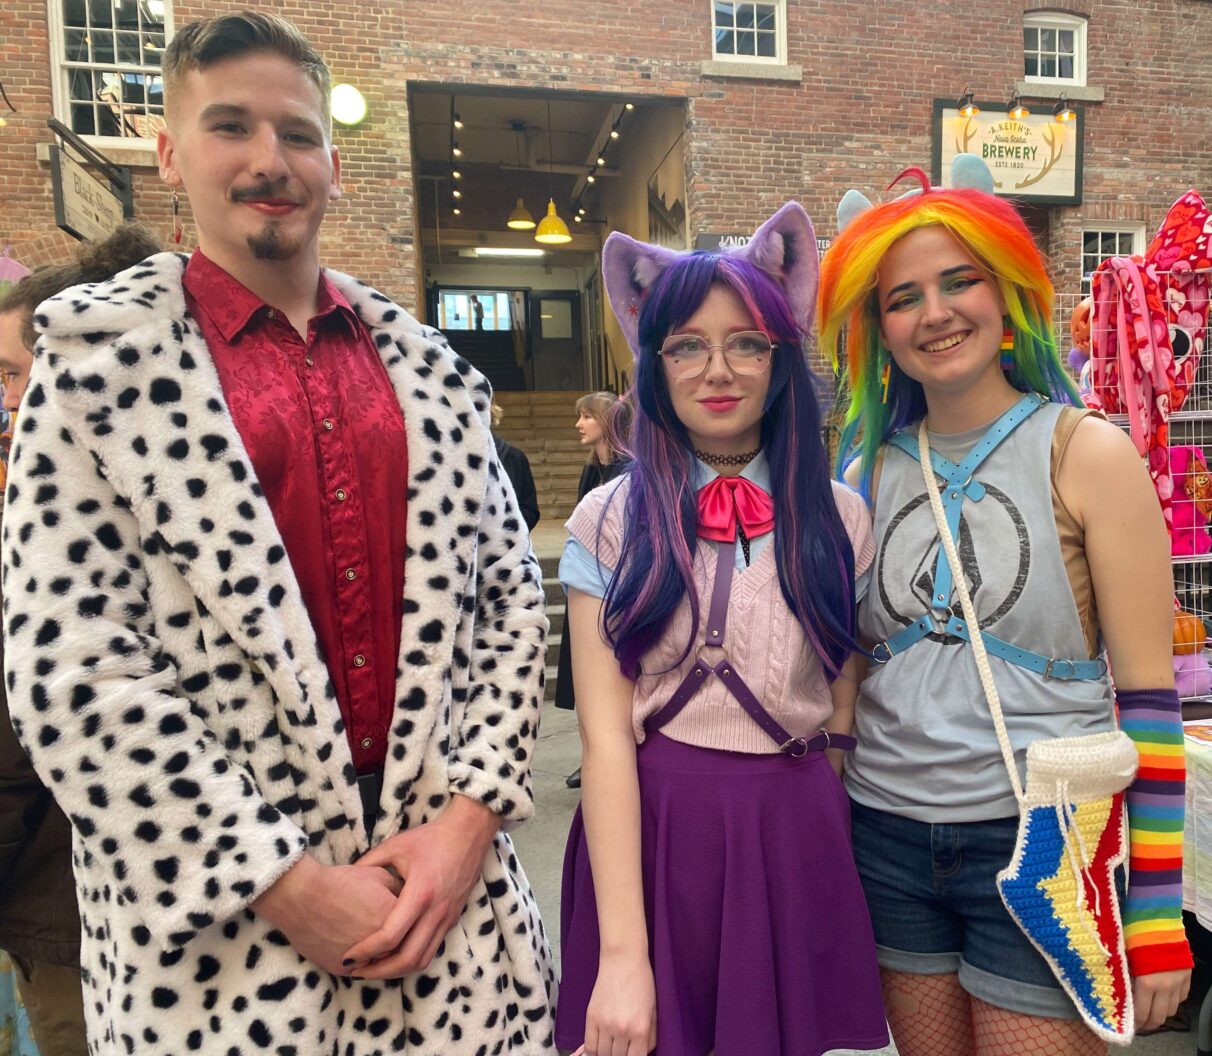 Nate Terafuse, Maddy Asbury and Rin Decker dressed up for Ret-Con, which sought to welcome fan art and cosplay.